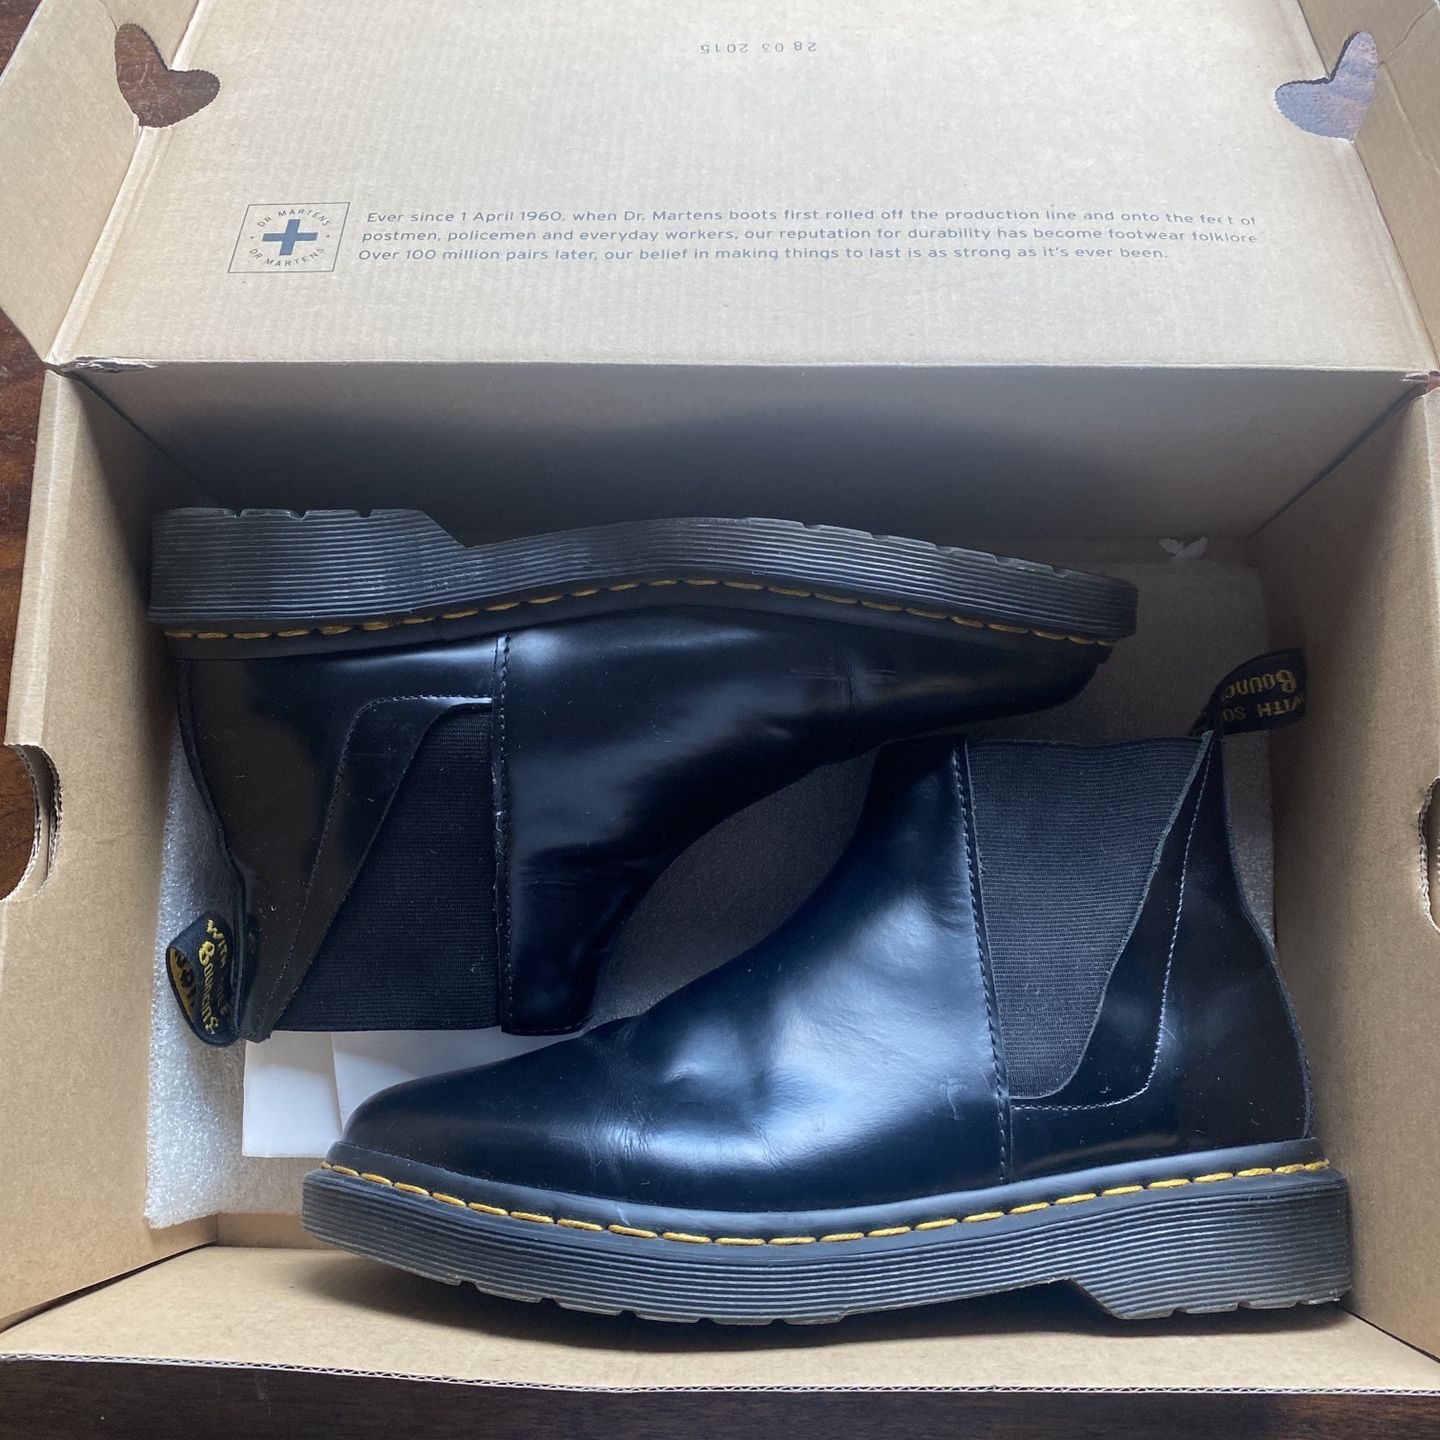 Dr. Martens Pointed Leather Chelsea Boots - Iconic Style with Original Box